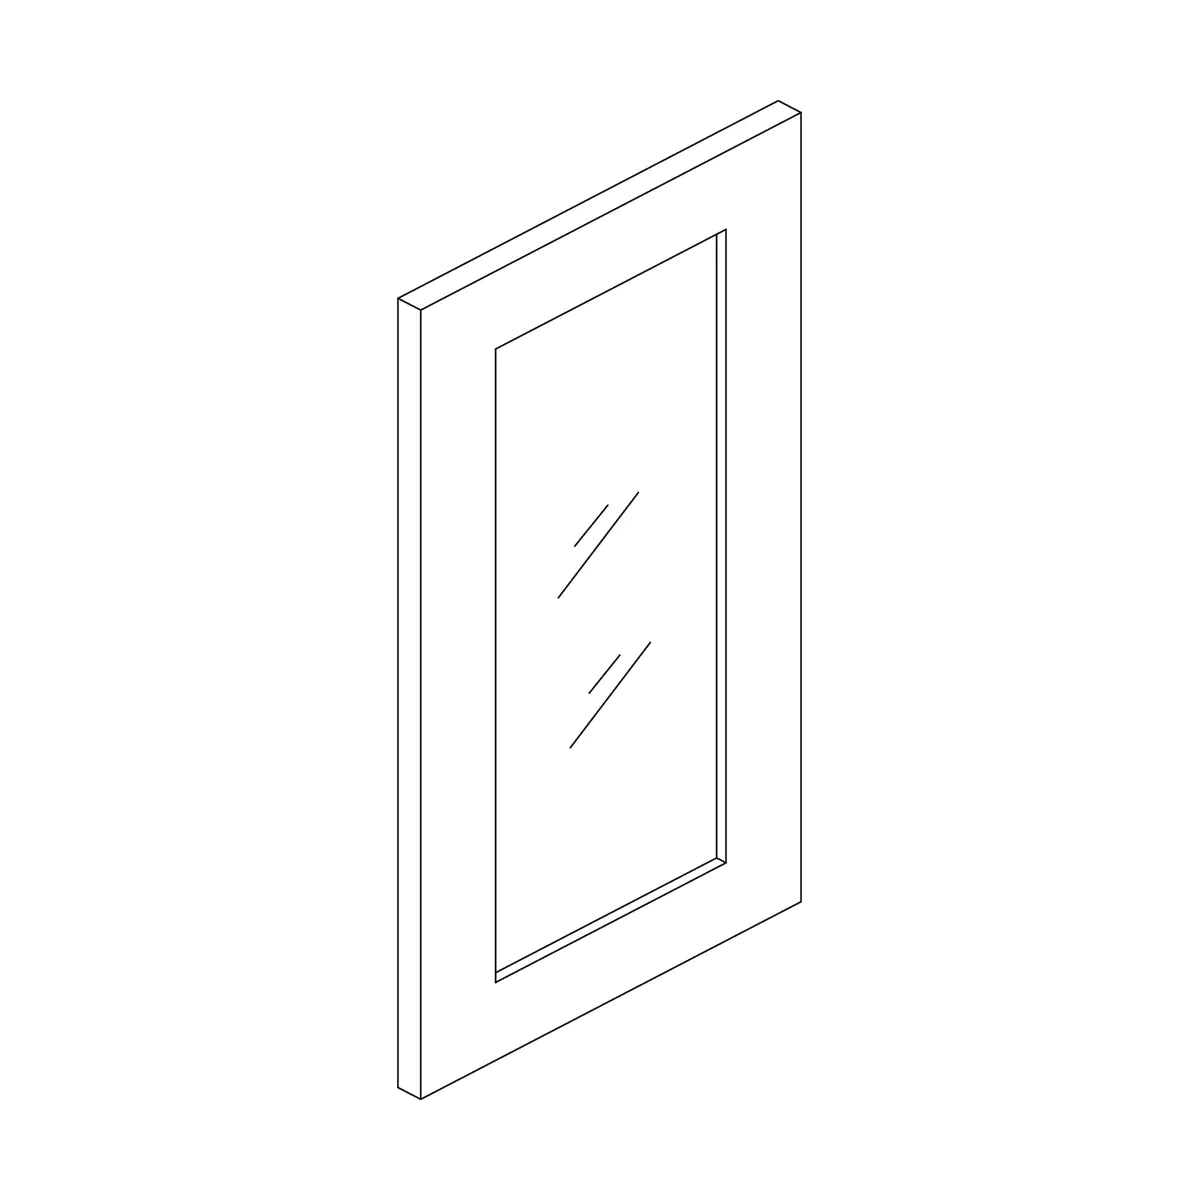 Craft Cabinetry Recessed Panel Gray Stain 14.5”W x 35”H Glass Door for W1536 Image Specifications